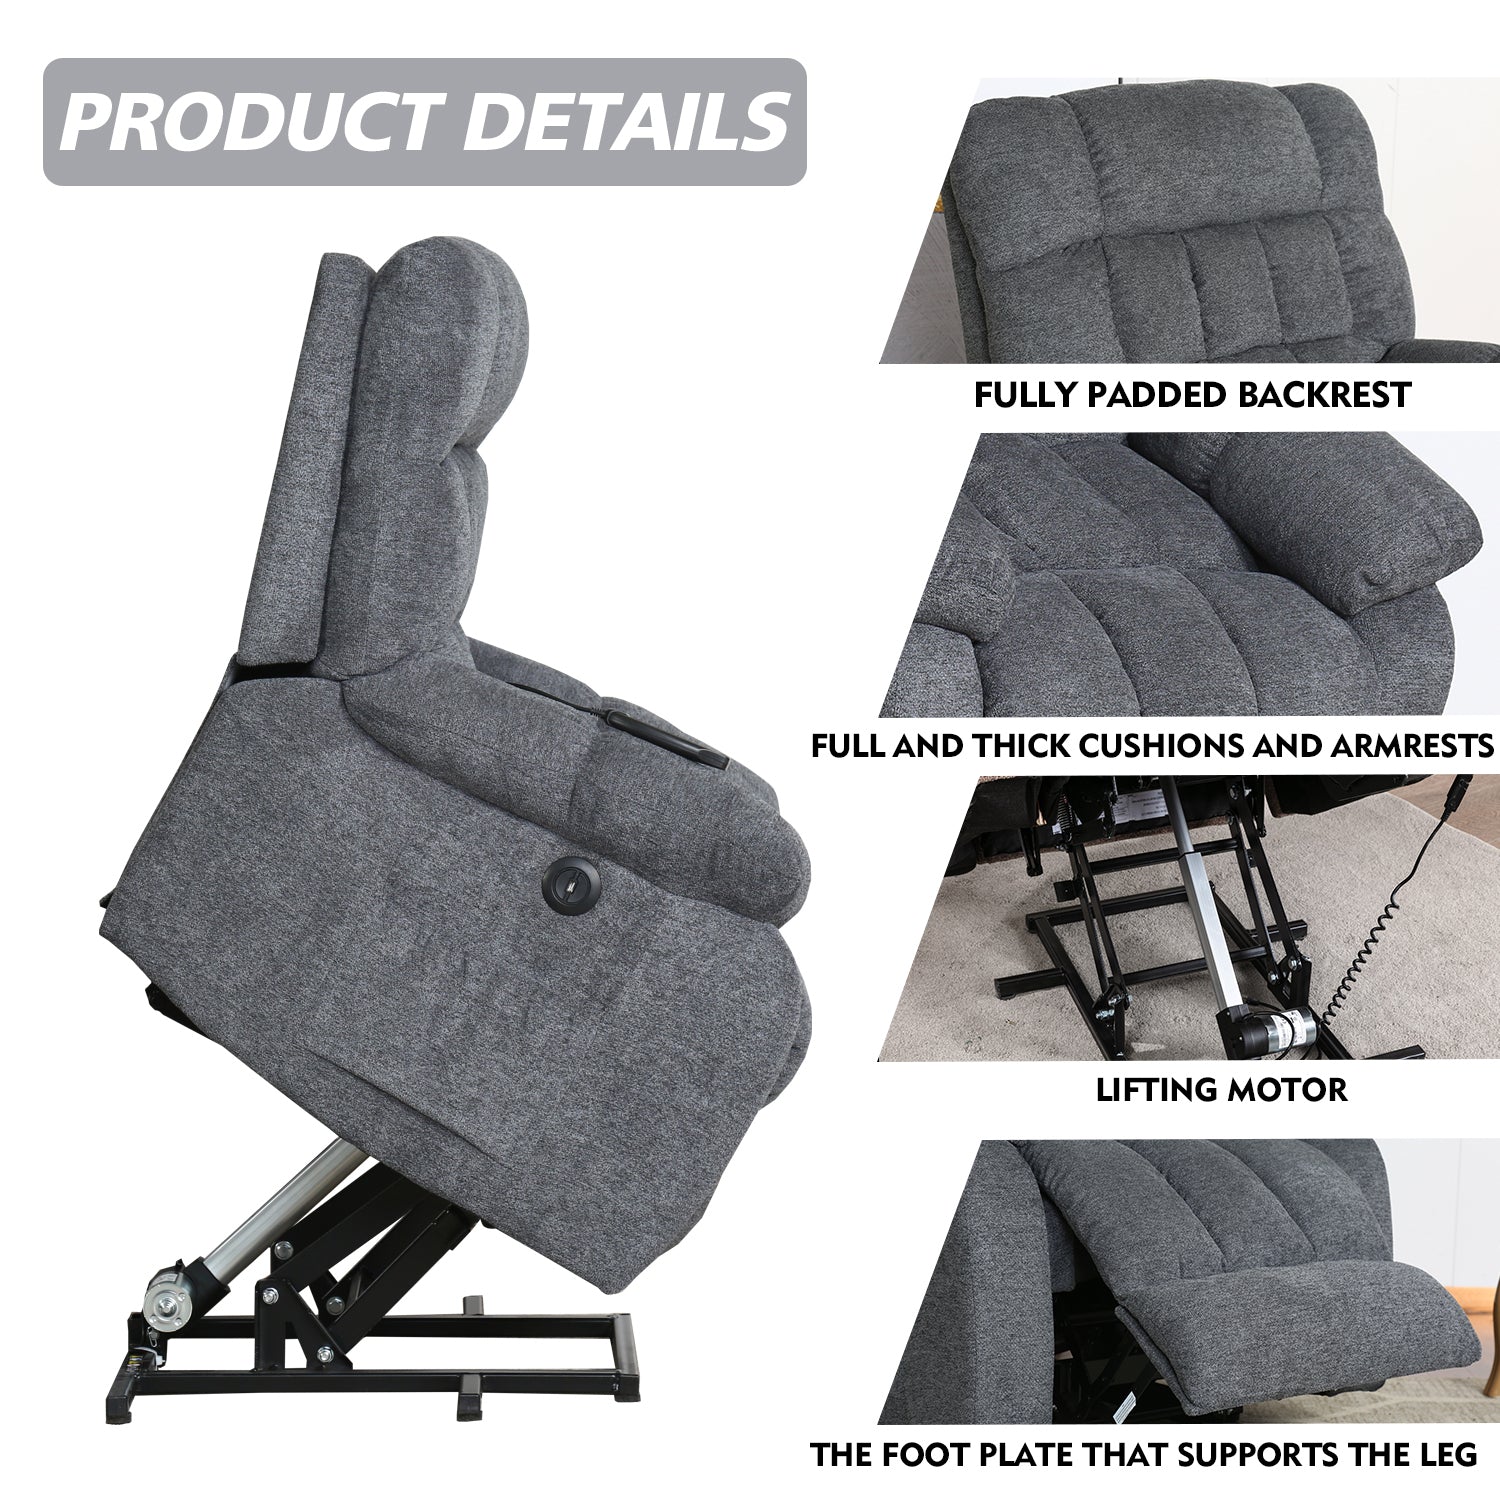 Electric Recliner With Heat & Massage (Navy Blue)